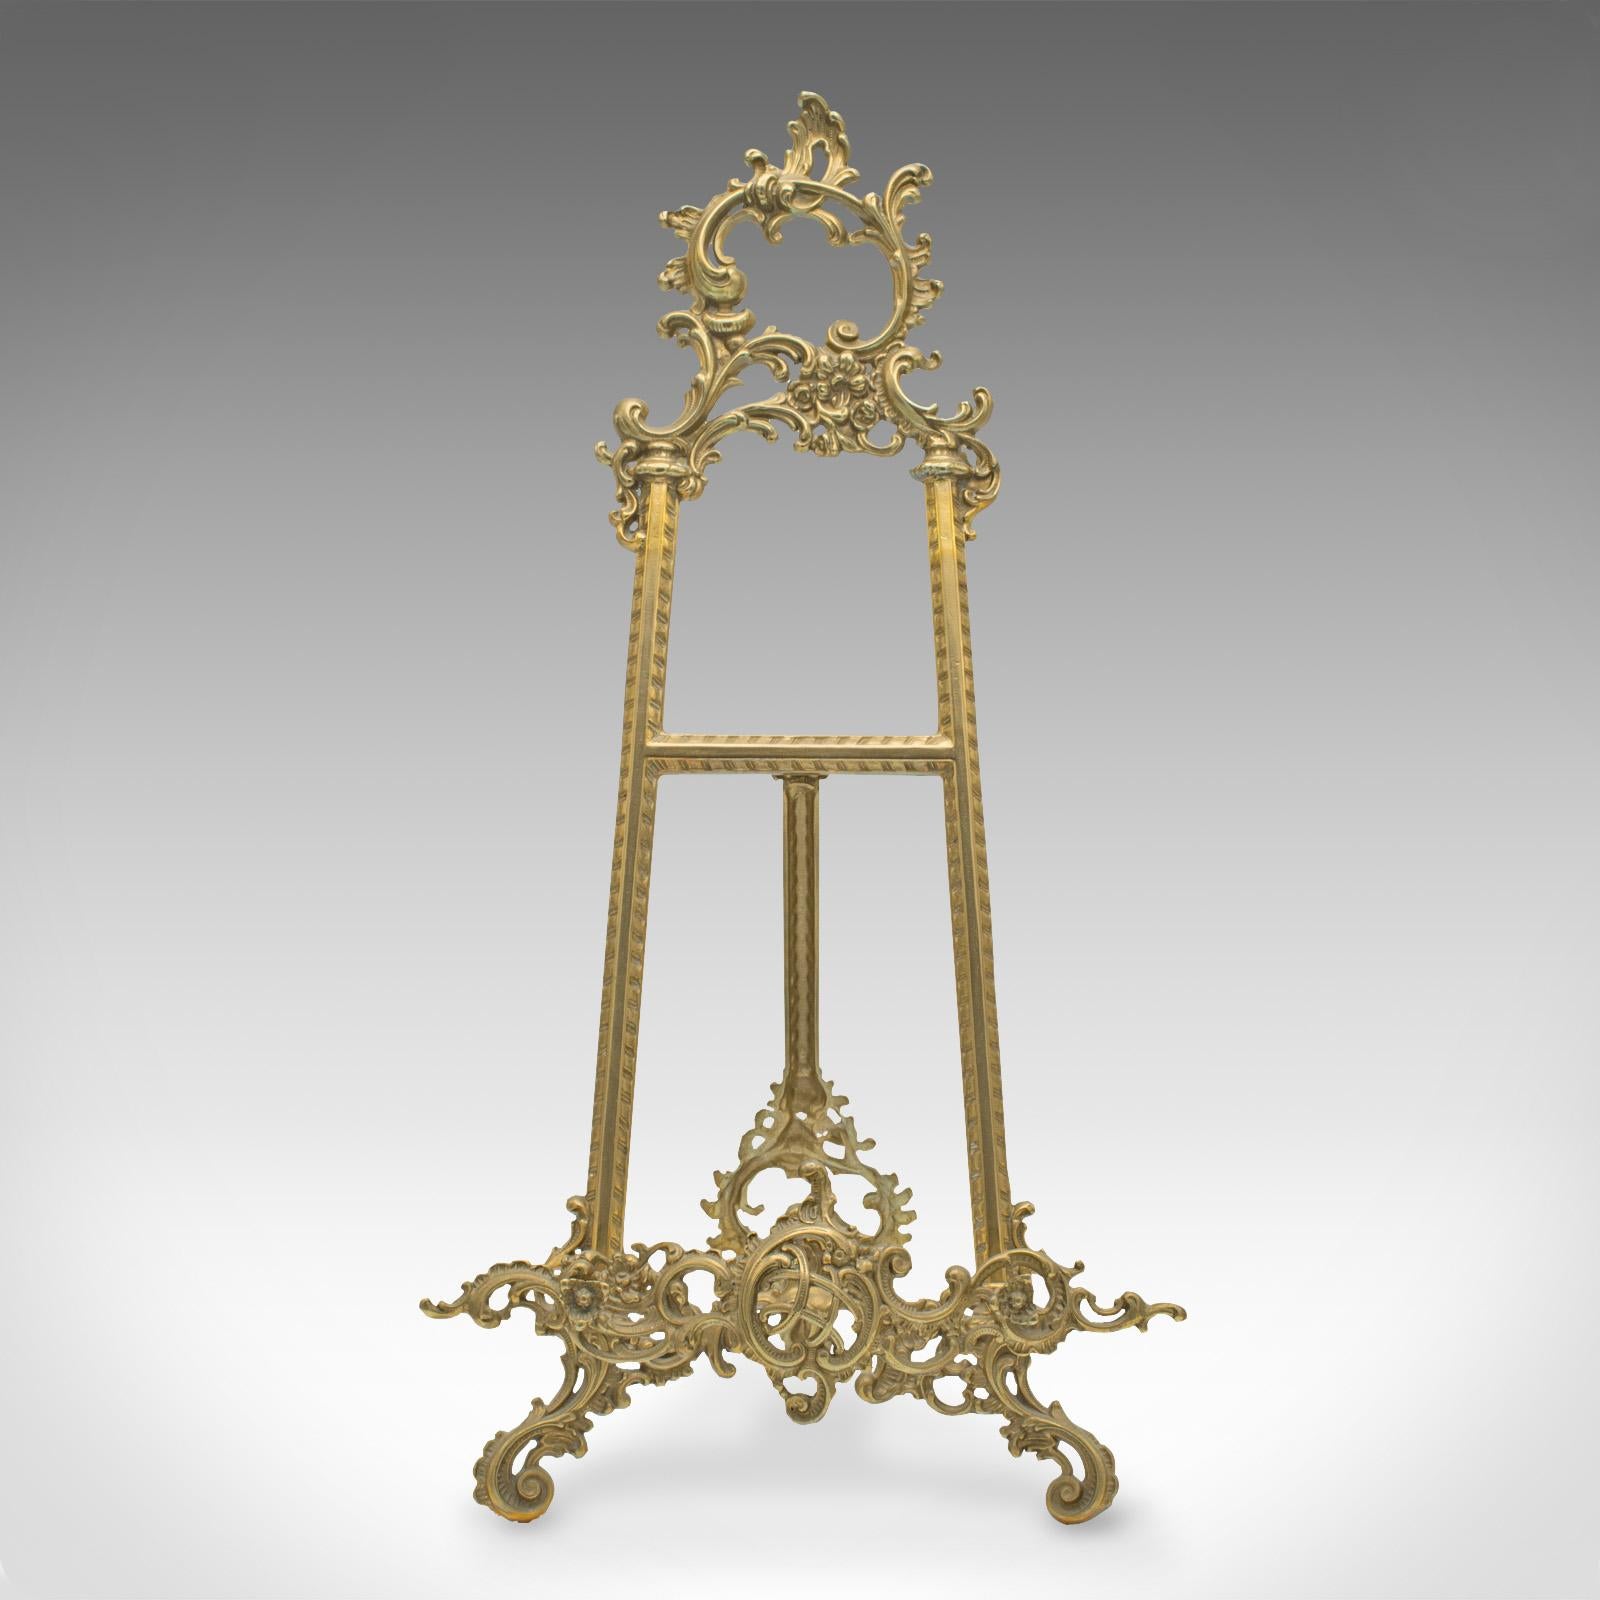 This is an antique decorative picture stand. An English, brass book rest or artist's easel in Art Nouveau taste, dating to the early 20th century, circa 1920.

Graceful and fascinating stand with a versatile purpose
Displays a desirable aged